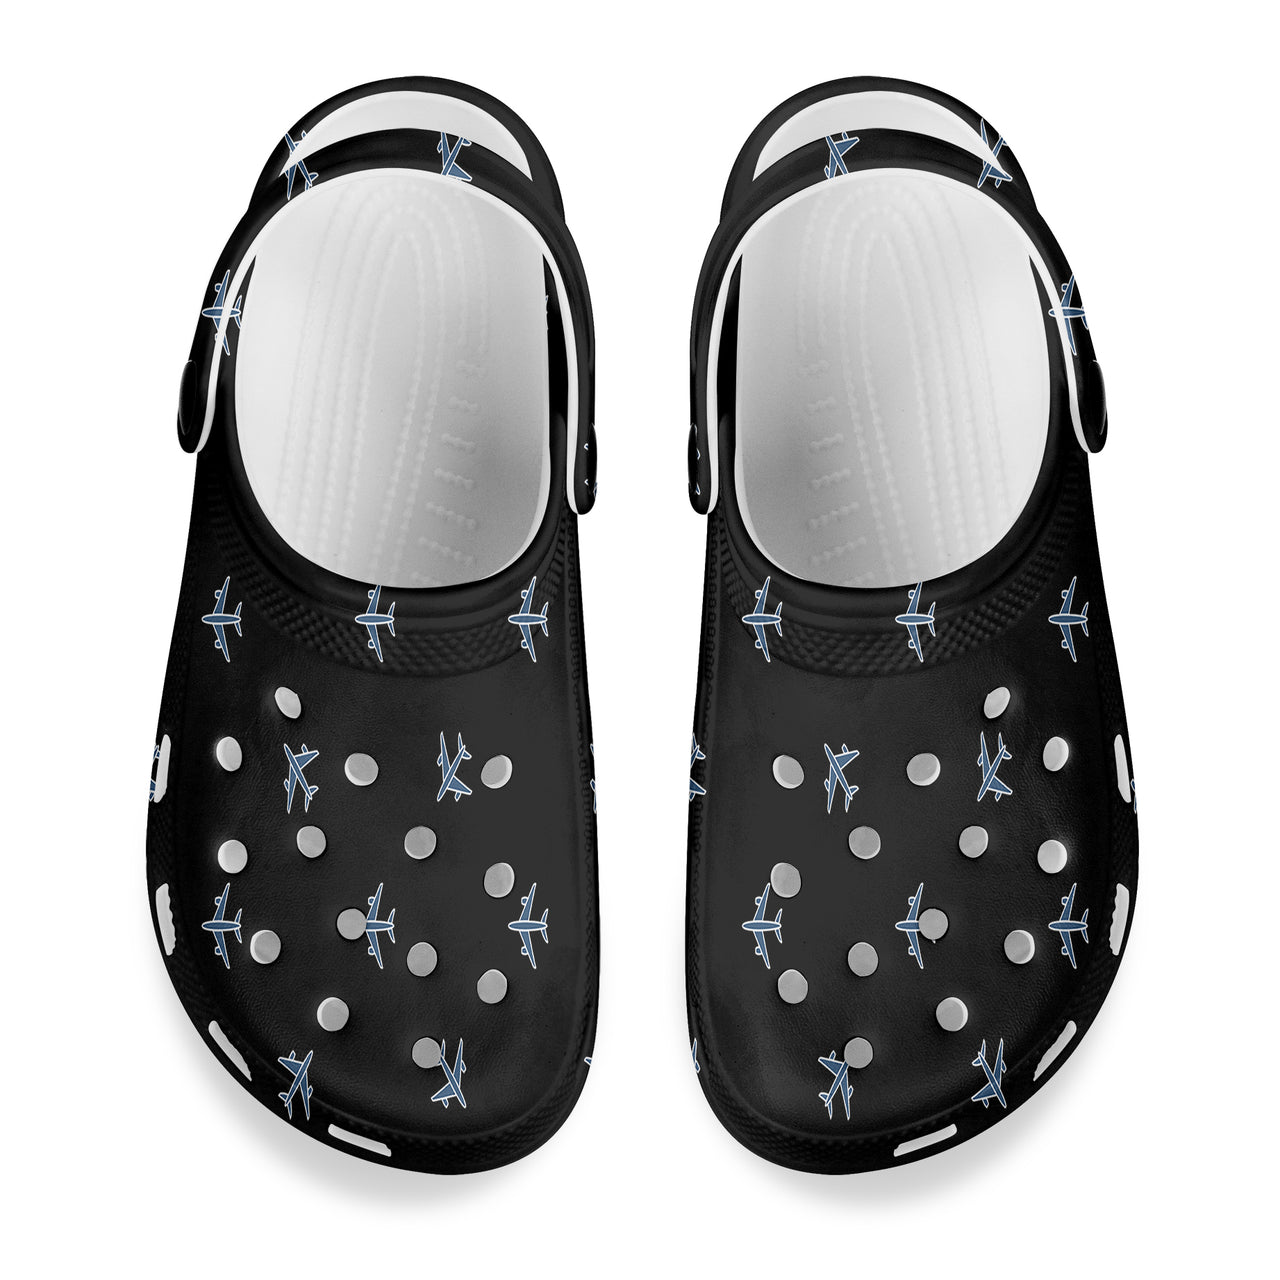 Nice Airplanes (Black) Designed Hole Shoes & Slippers (WOMEN)